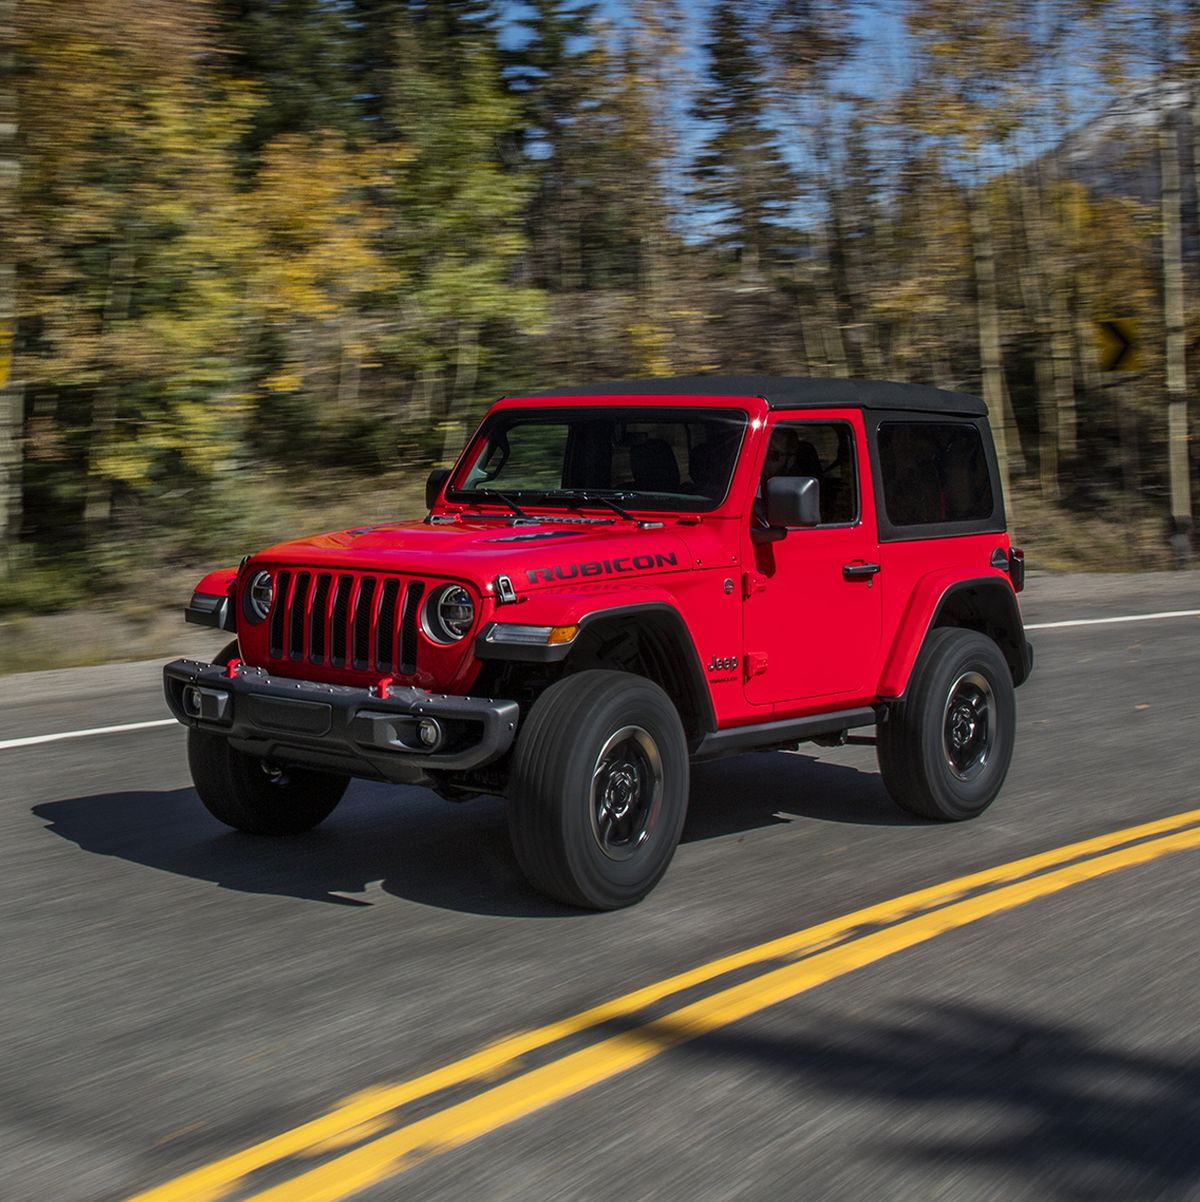 First Drive: All-New 2018 Jeep Wrangler